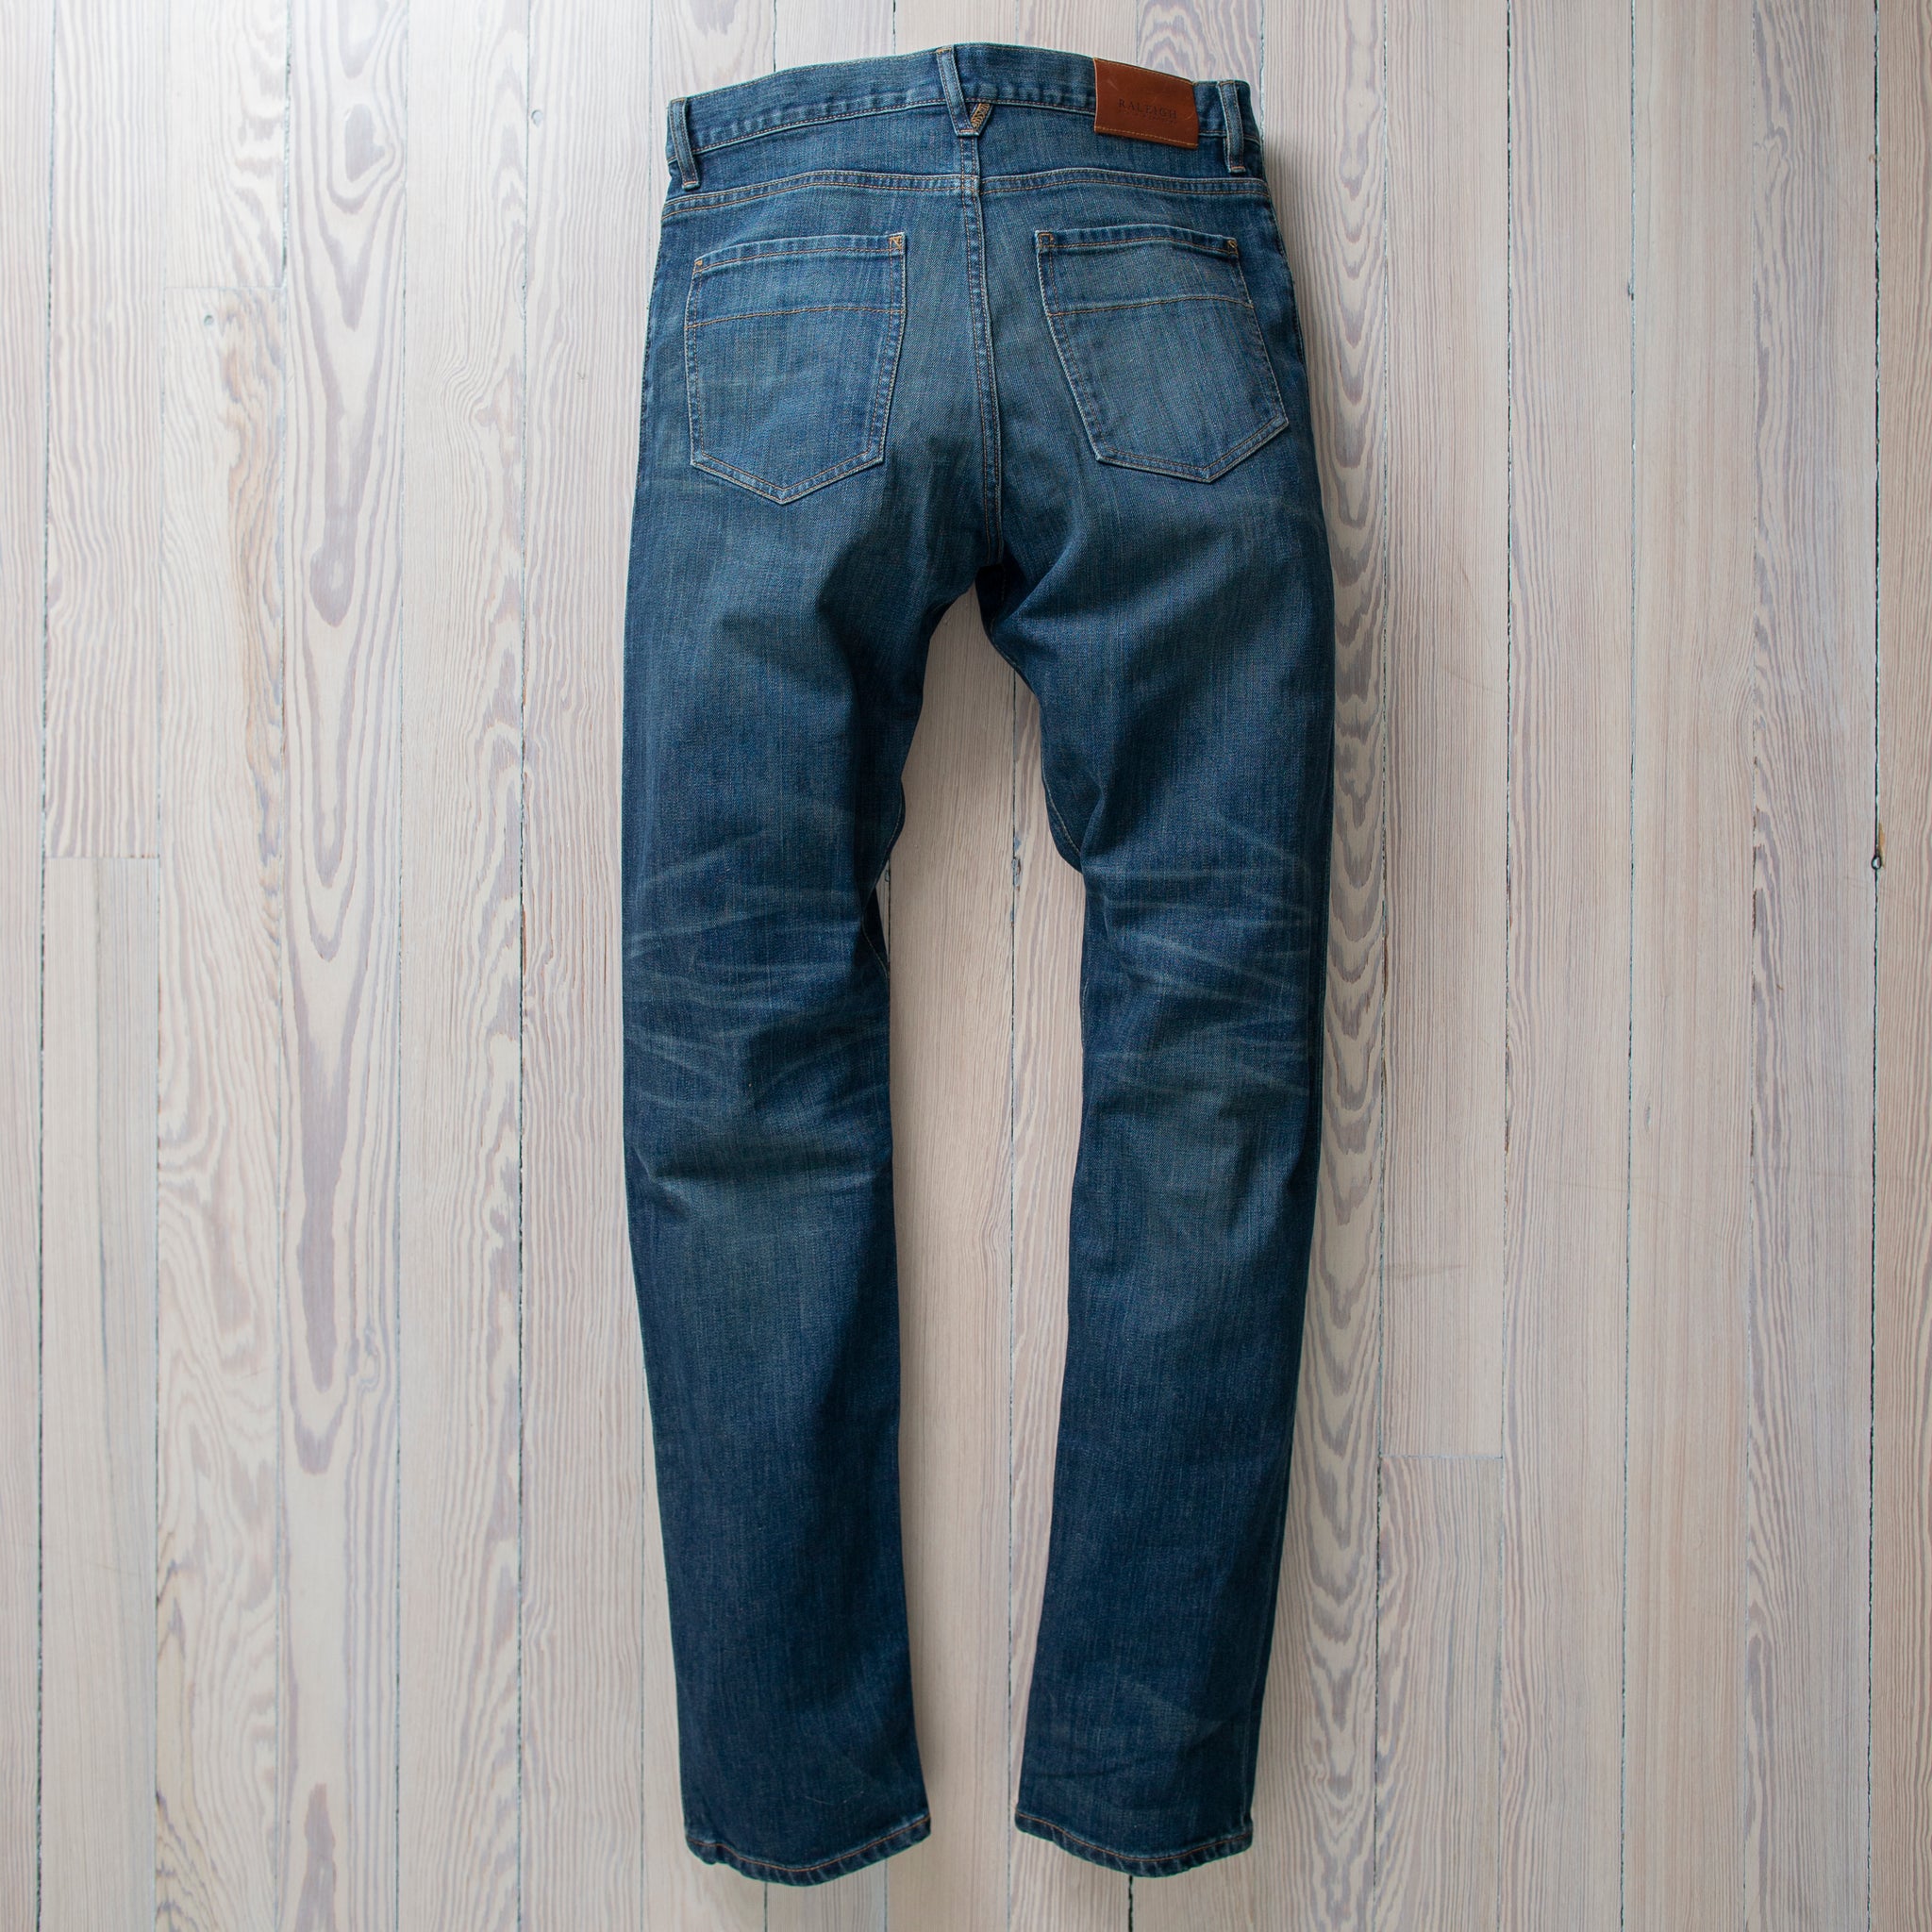 angle: 319 Wash  Raleigh Denim Workshop Alexander work fit jeans in the 319 wash, front view